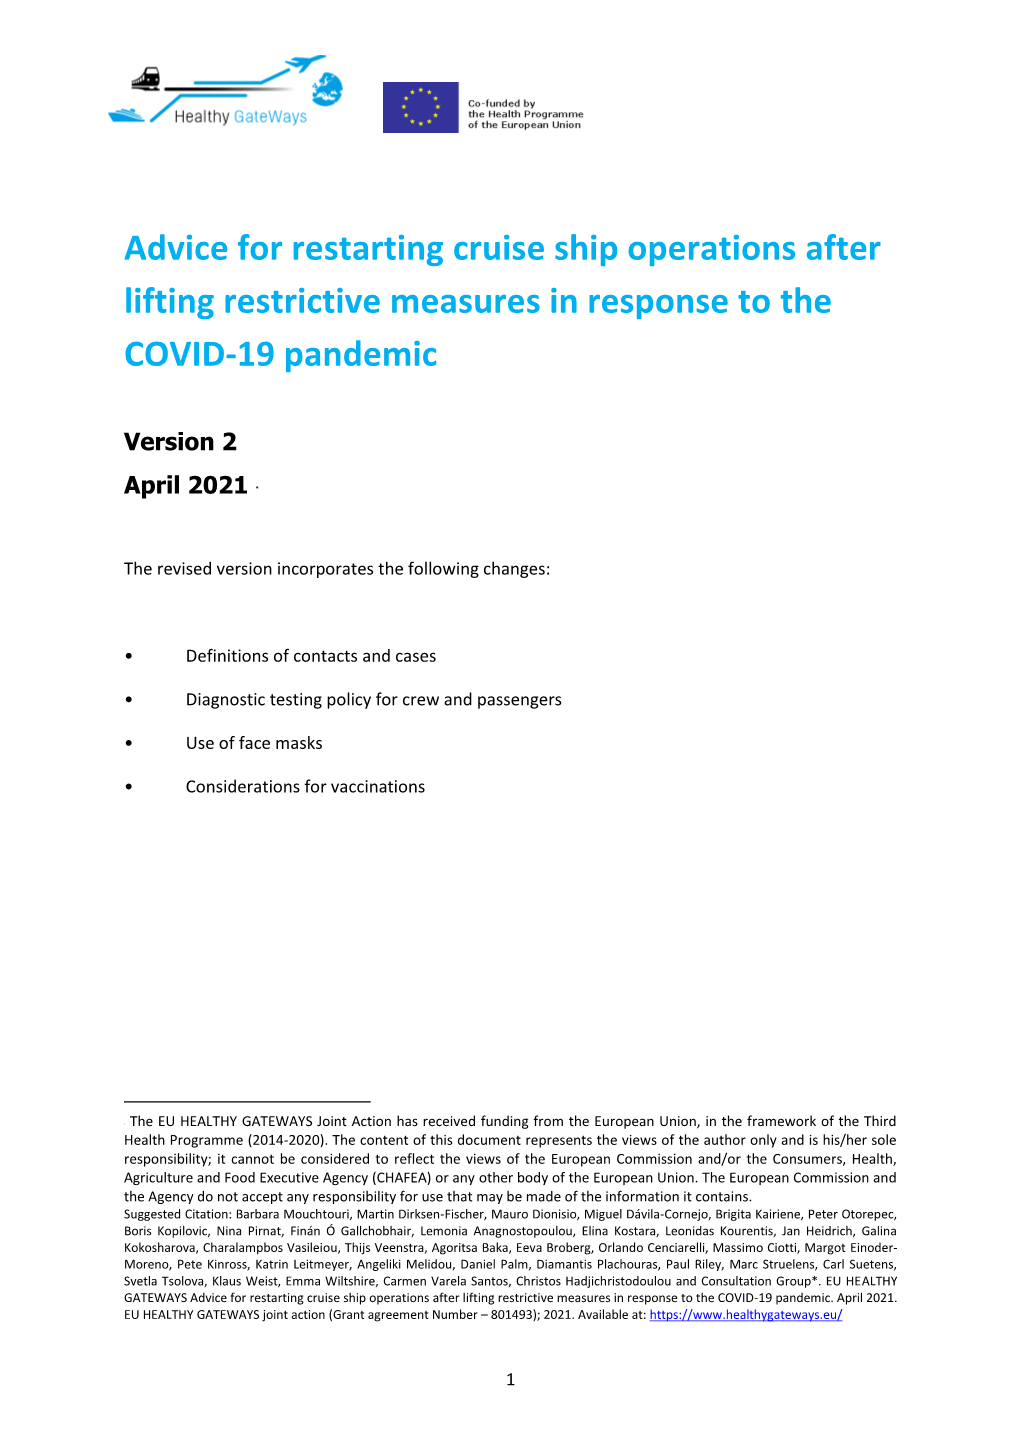 Advice for Restarting Cruise Ship Operations After Lifting Restrictive Measures in Response to the COVID-19 Pandemic